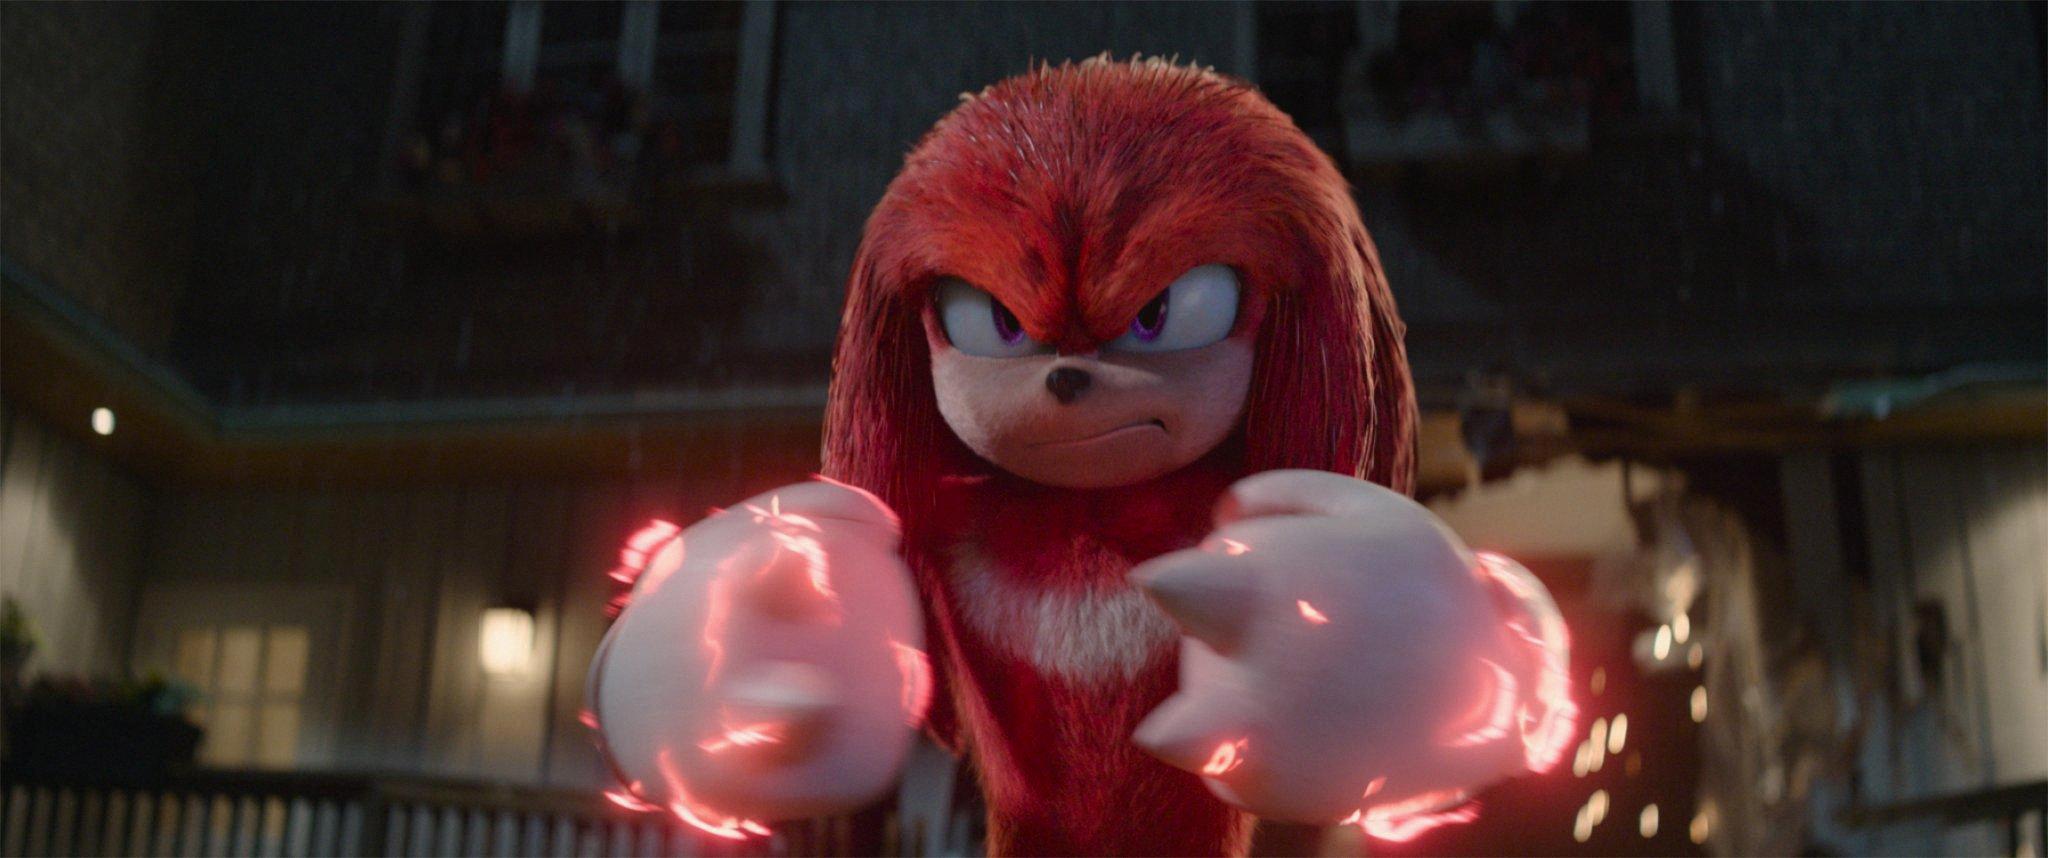 is knuckles a bad guy